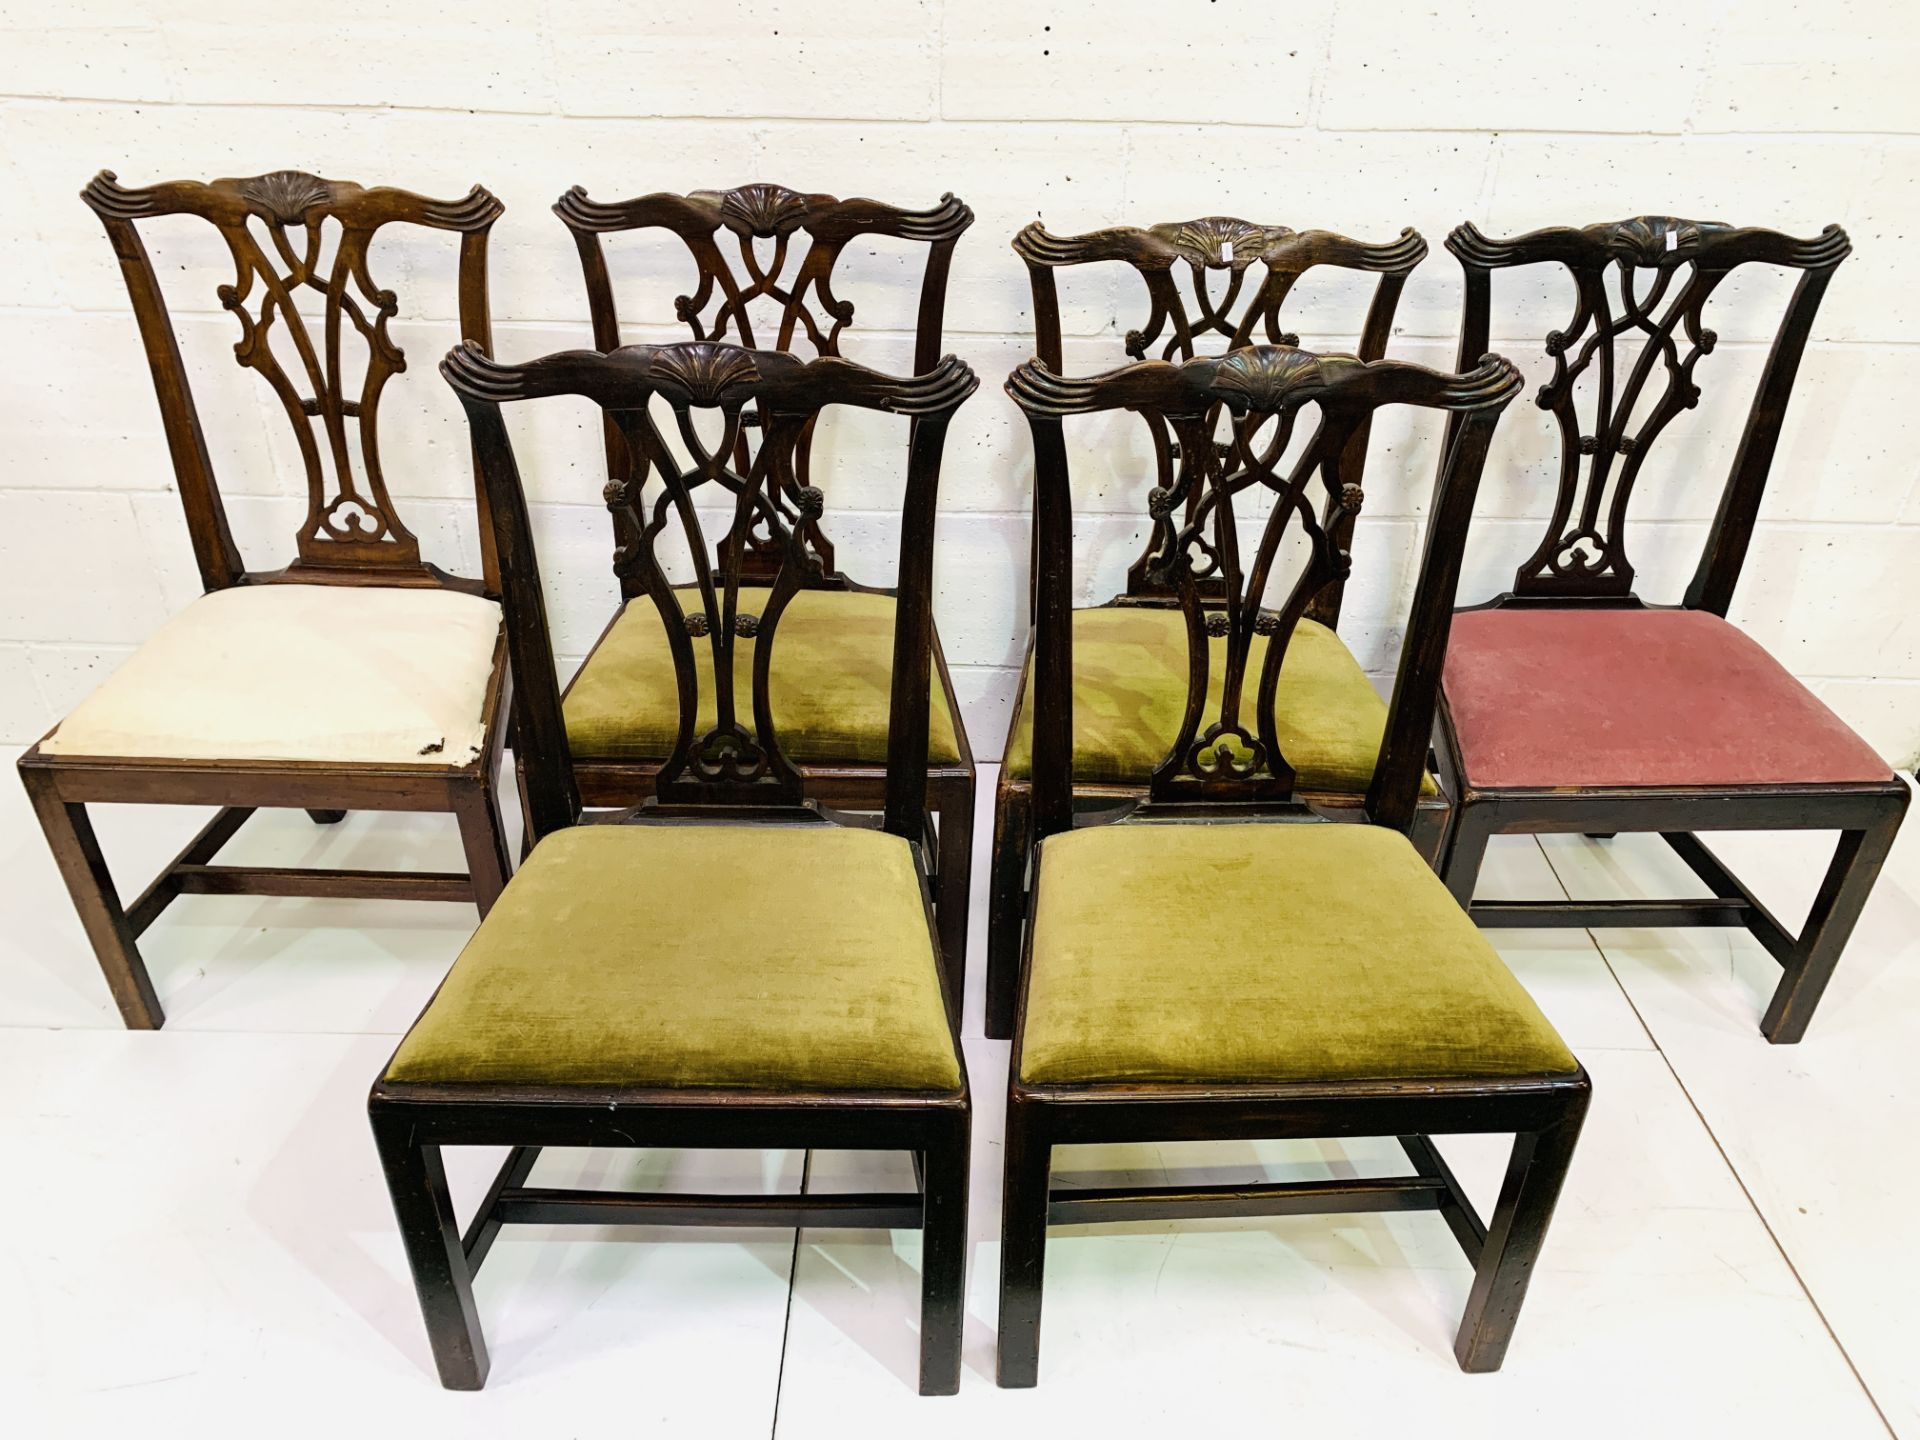 A set of six Georgian-style mahogany framed dining chairs